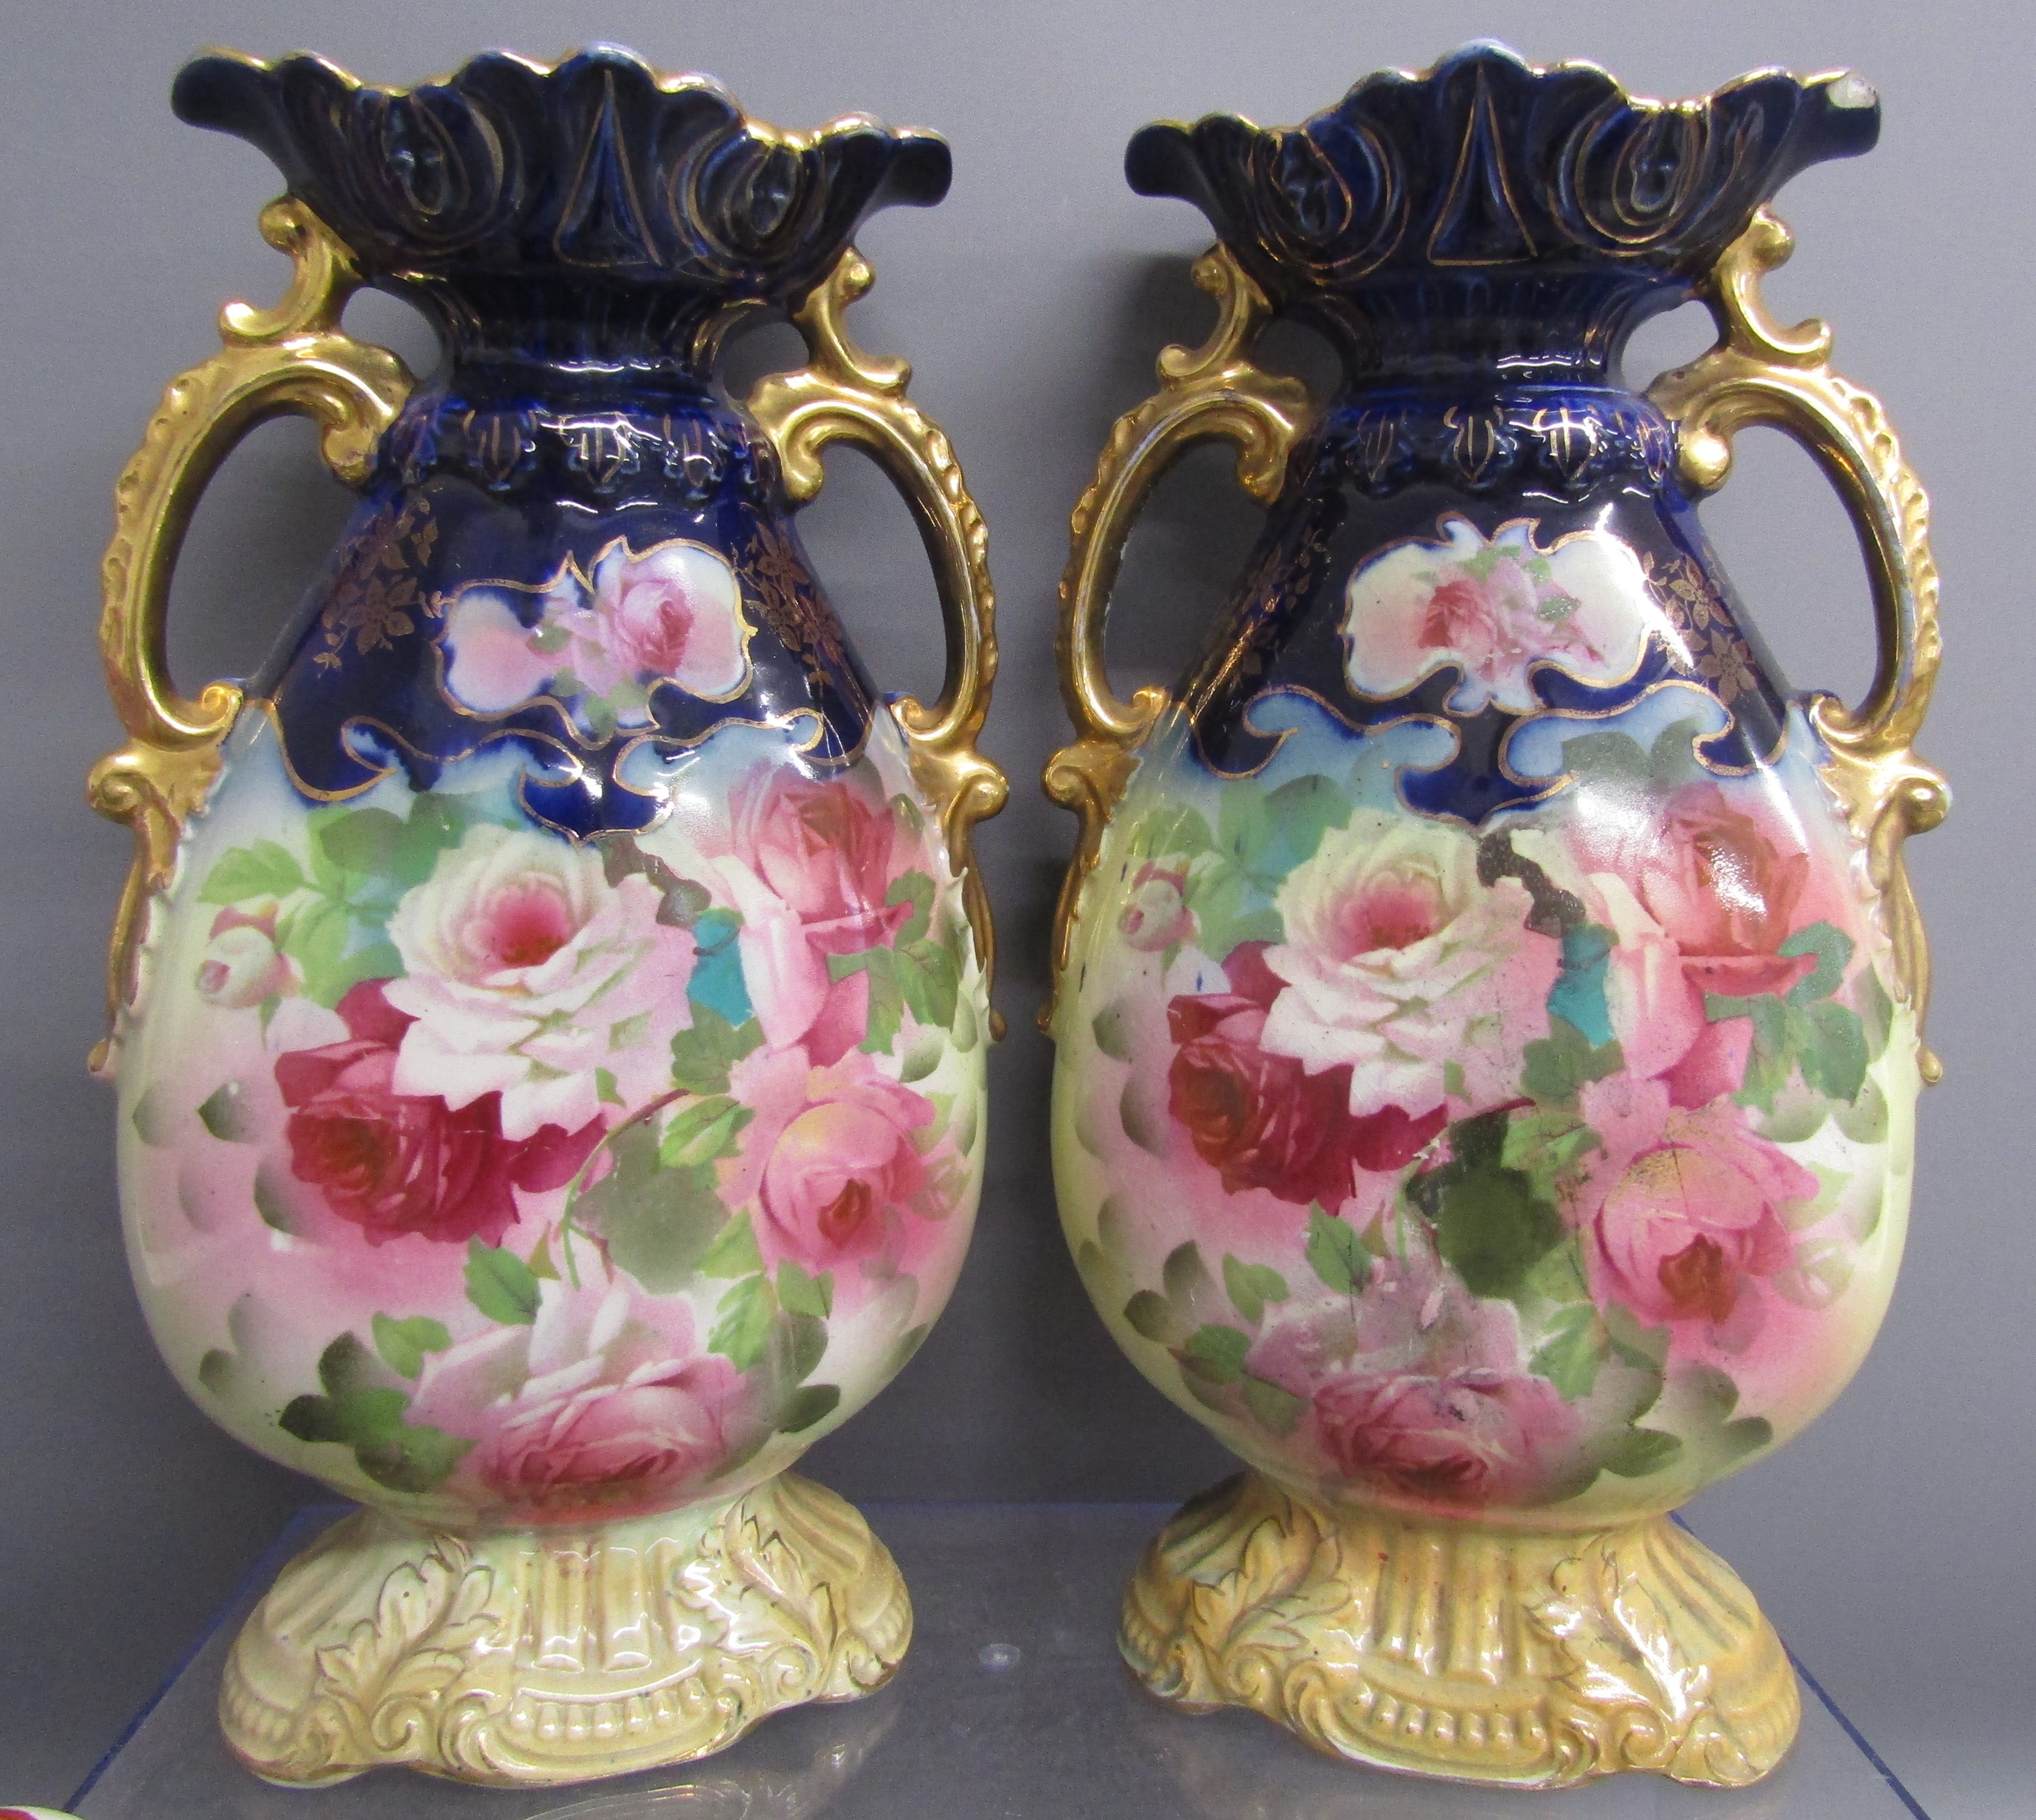 Pair of twin handled mantel vases painted with pink roses, pair of Staffordshire dogs, Made in Japan - Image 4 of 5